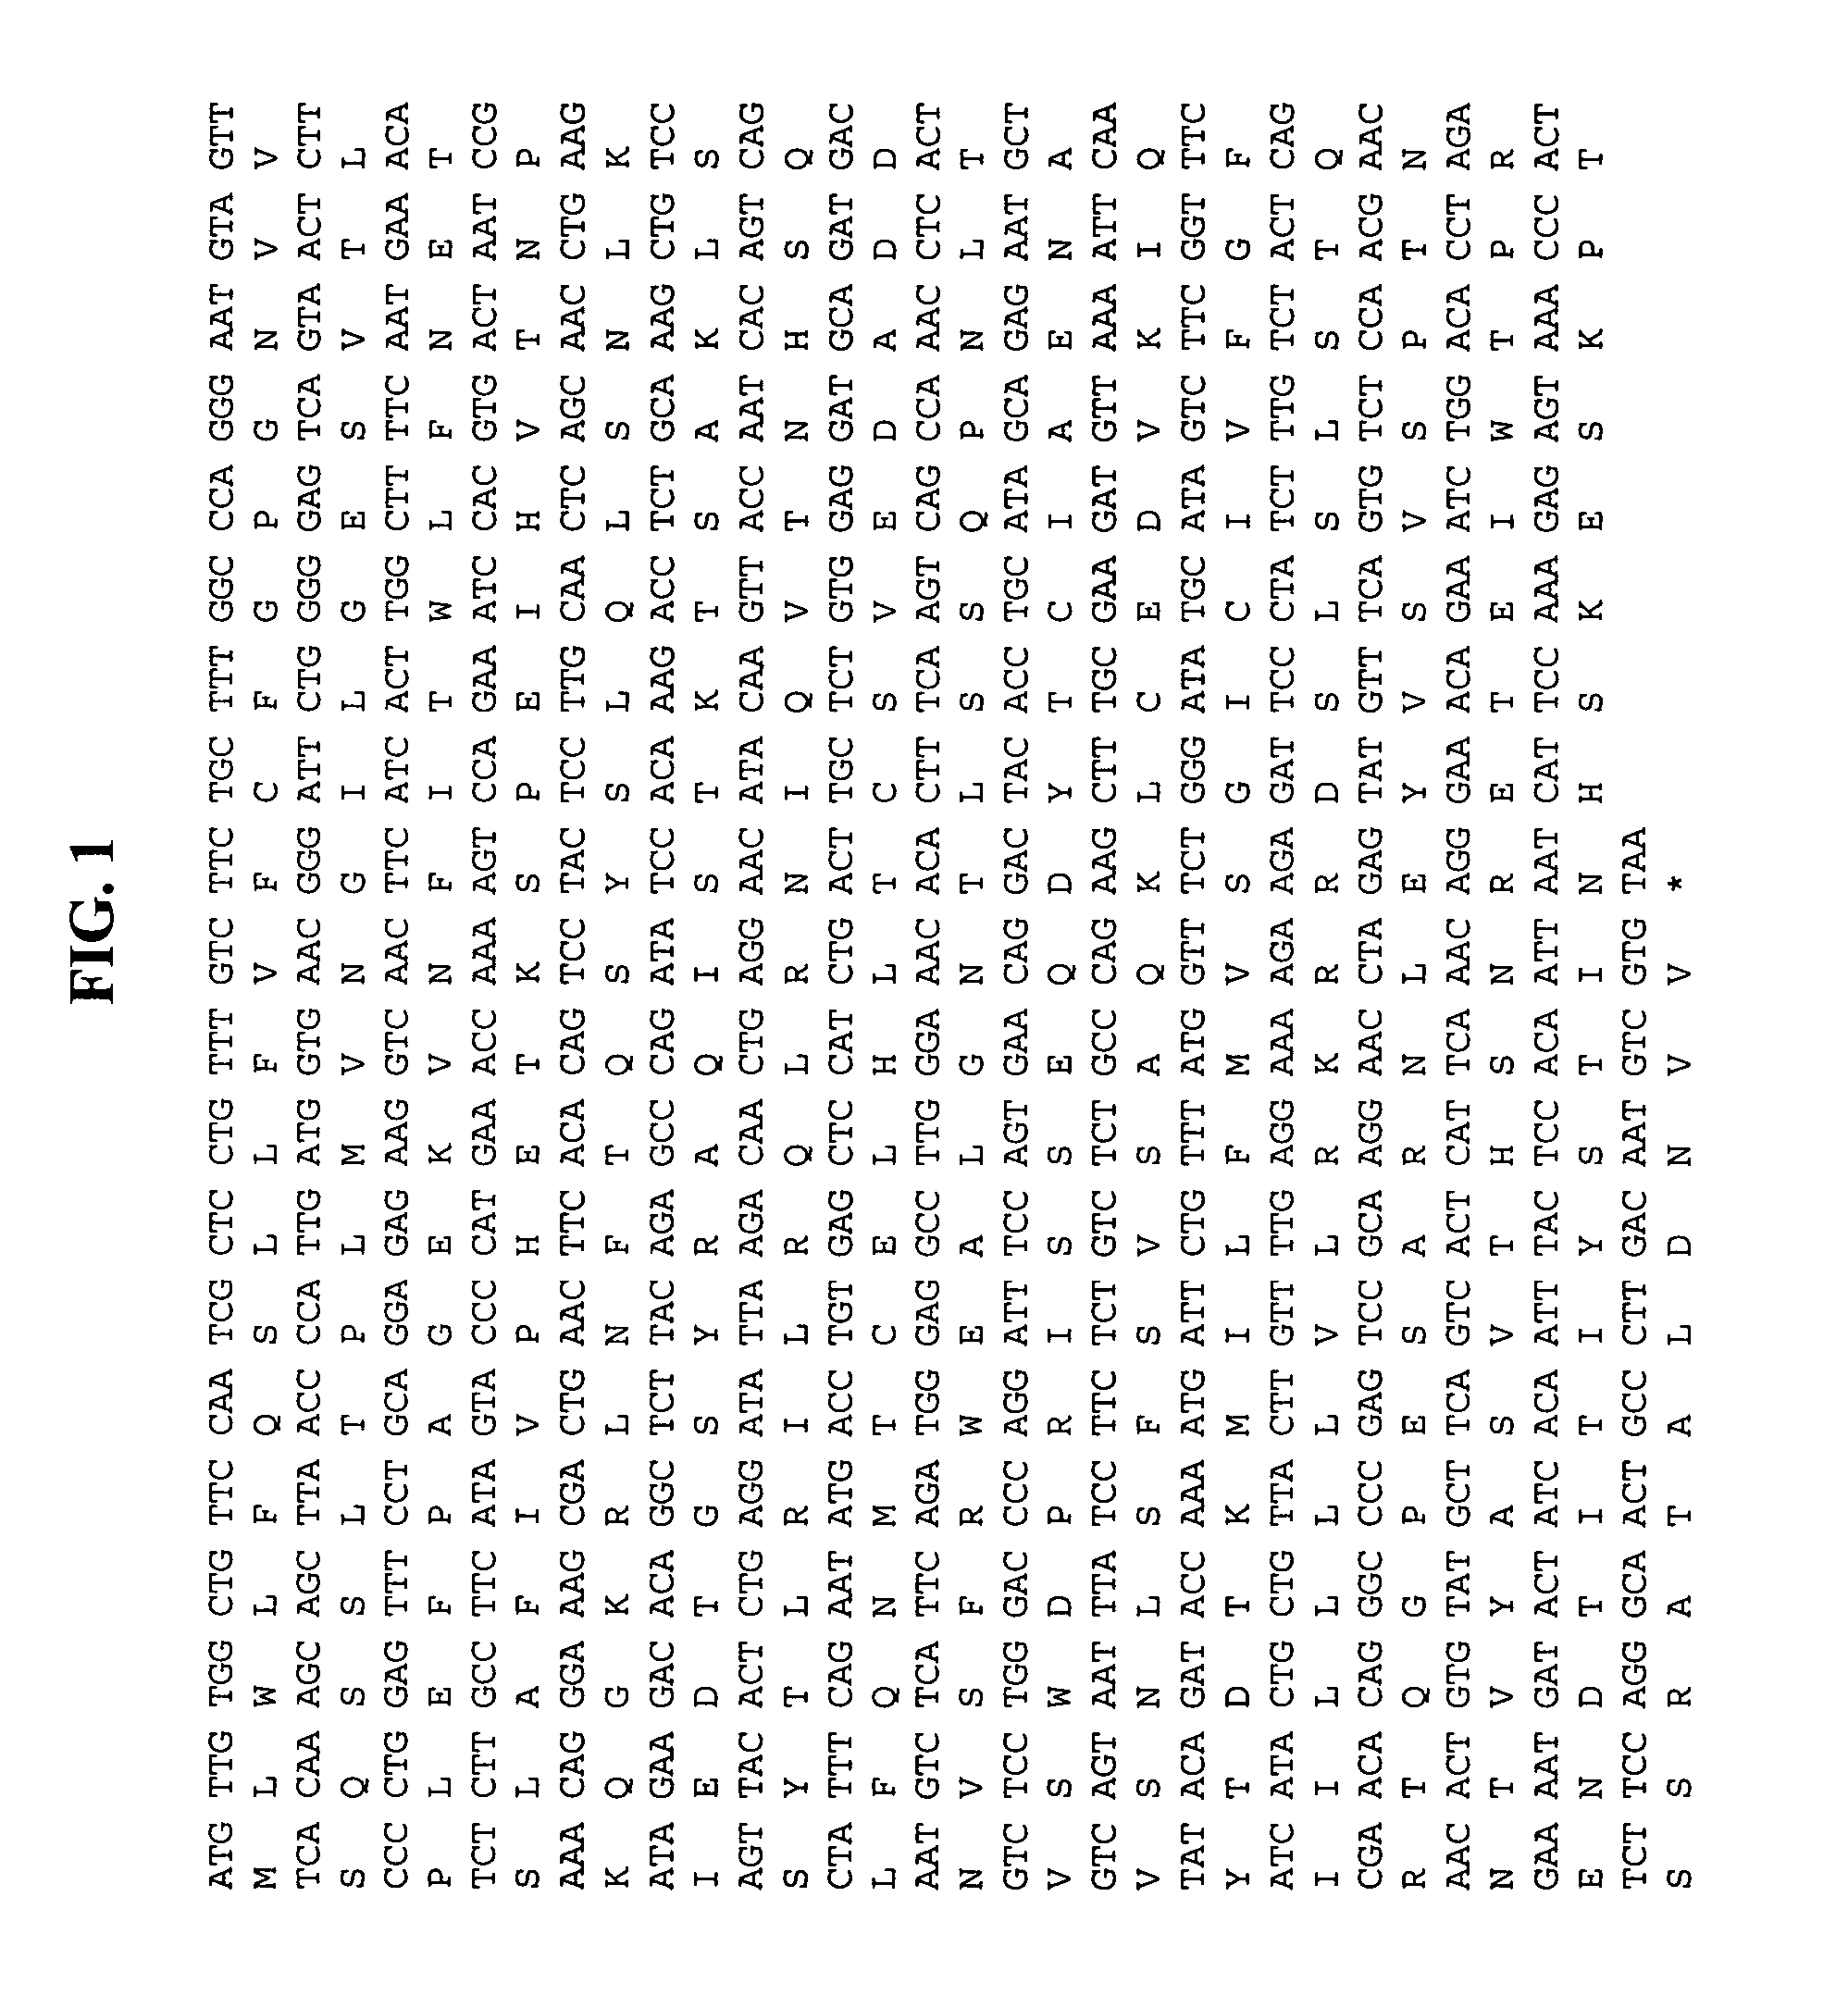 Methods of therapy and diagnosis using immunotargeting of CD84Hy1-expressing cells